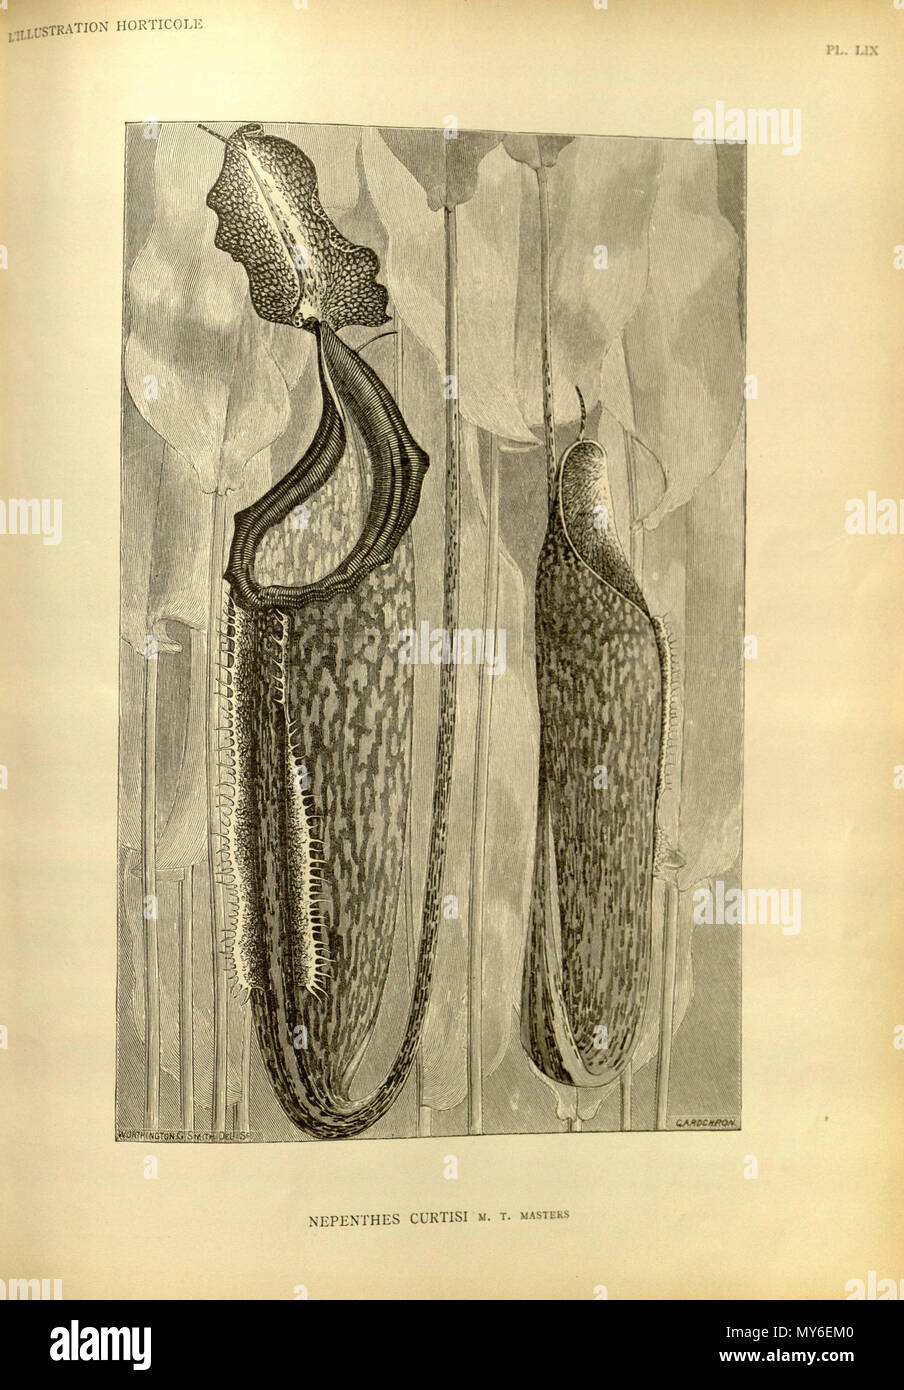 384 Nepenthes curtisii -'Illustration horticole (1888) Foto Stock